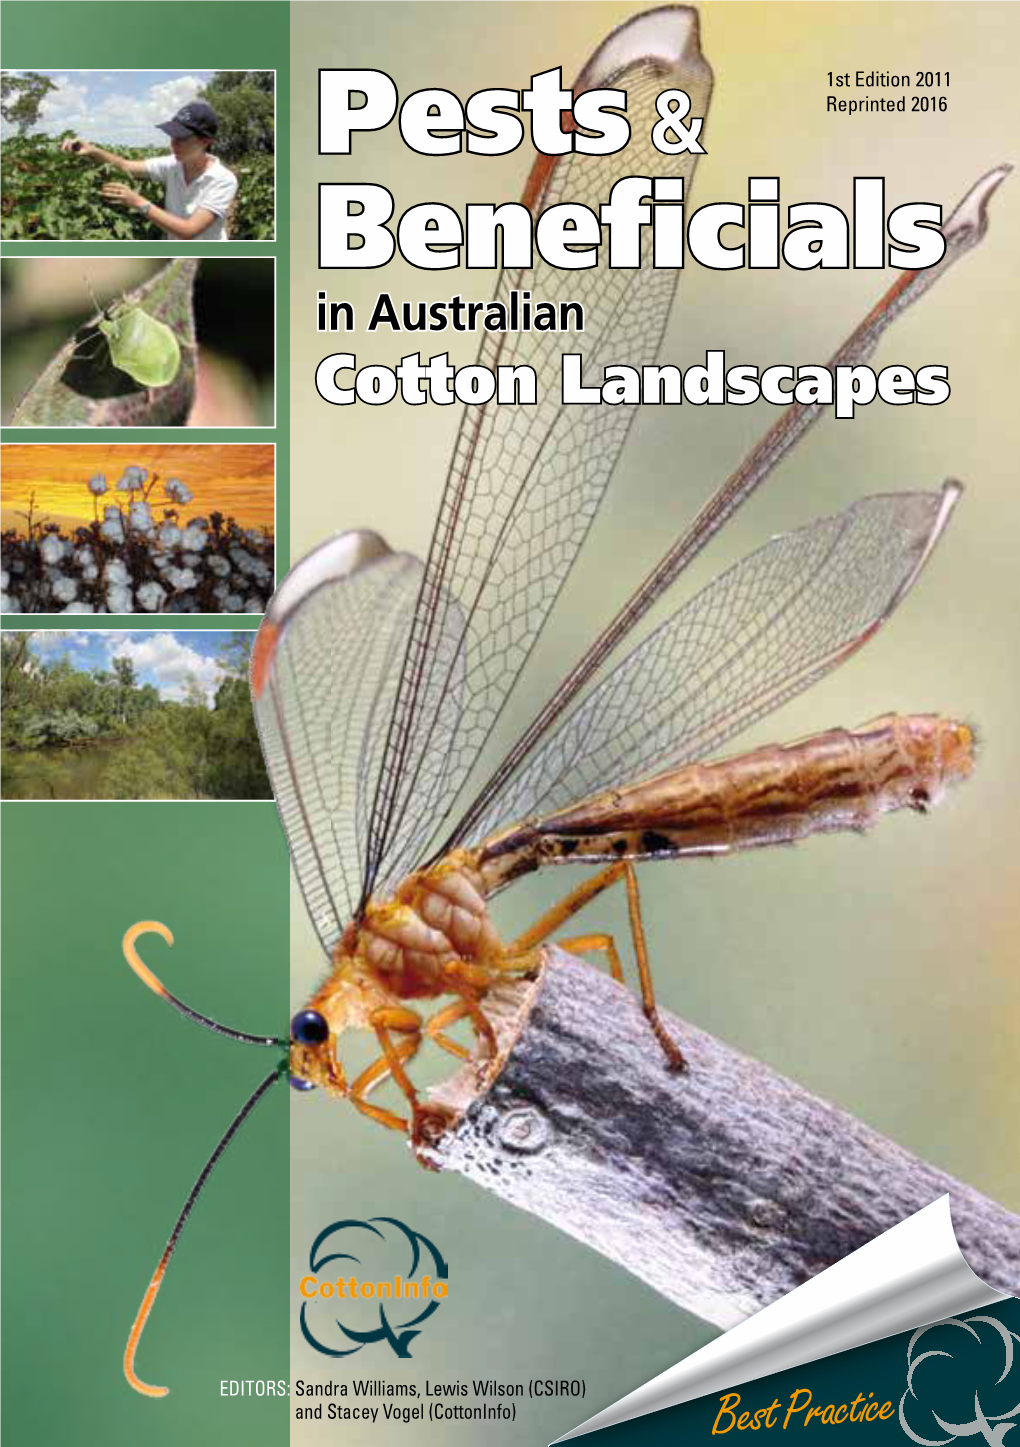 Pests & Reprinted 2016 Beneficials in Australian Cotton Landscapes